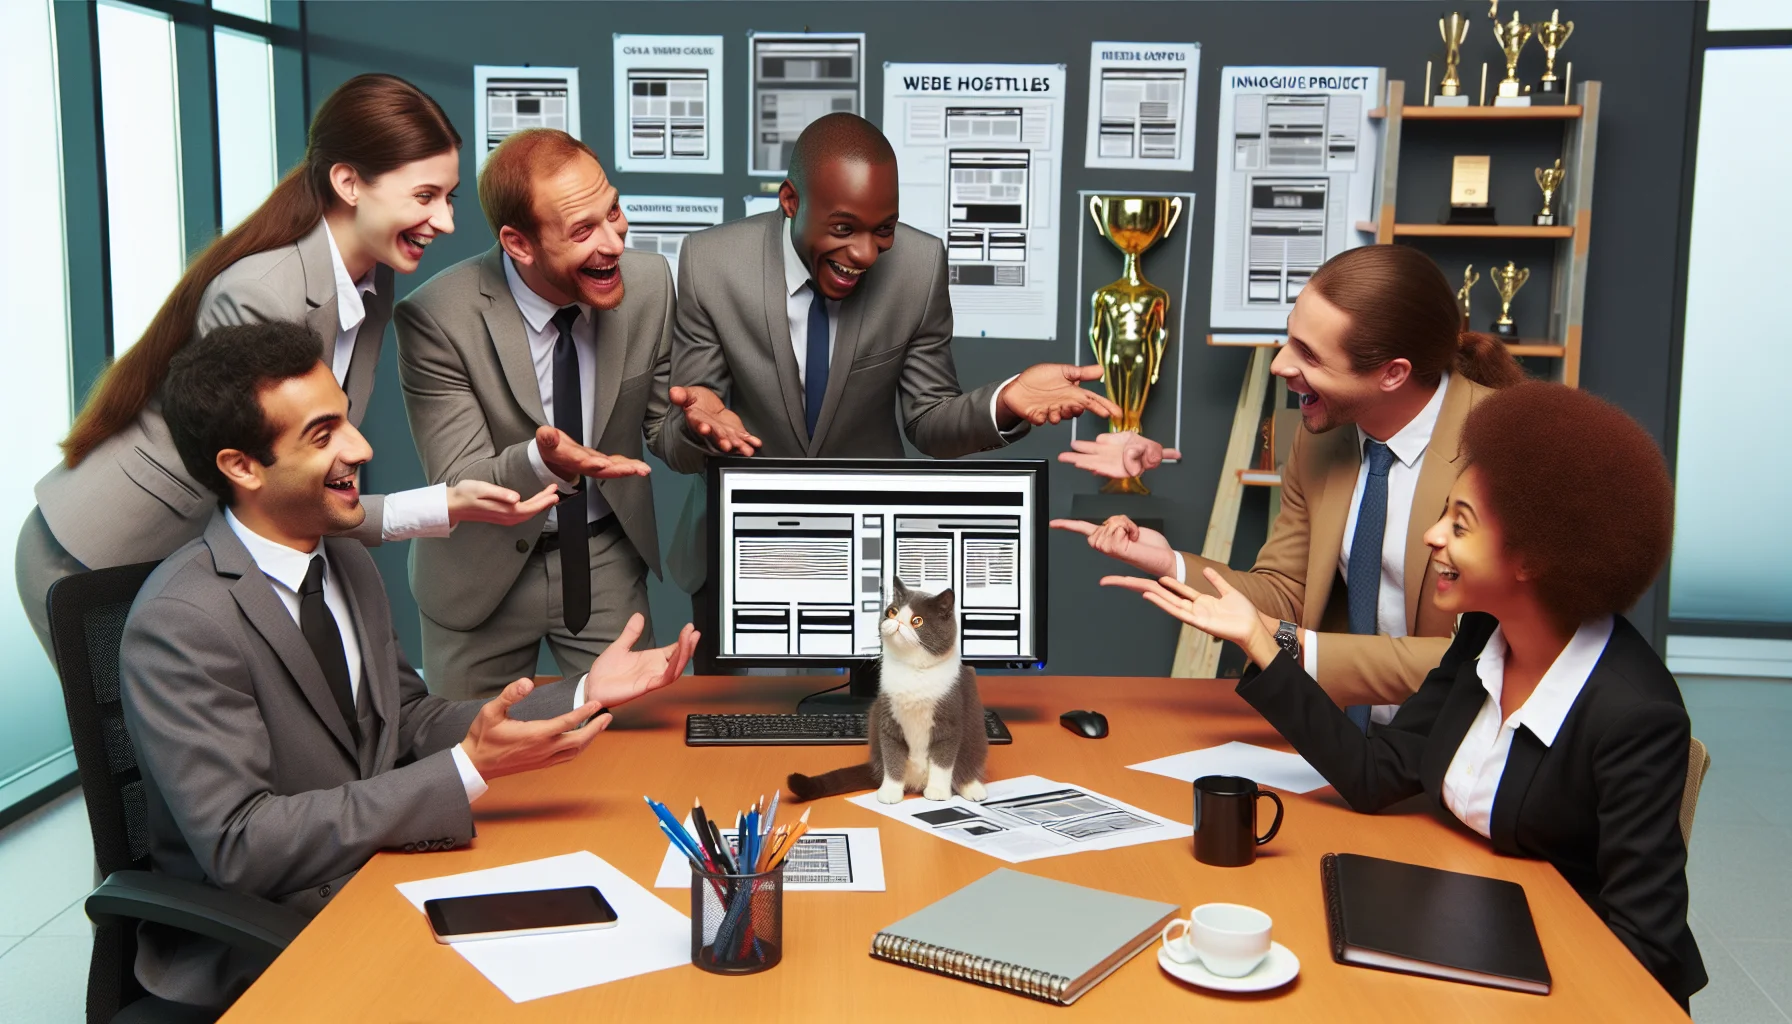 Make a picture embodying humor and optimism, set in an office. Imagine there are employees of diverse descents like Caucasian, Black and Hispanic, both men and women, engaged in an amusing situation. They are animatedly discussing and pointing to a computer screen, which displays a variety of generic web hosting templates. Infuse some laughter by placing a quirky looking cat mascot on the desk which seems to be “reviewing” some printouts of the website templates. Include a touch of aspiration, by placing symbols of success around the office like a wall-mounted award or an innovative project blueprint.